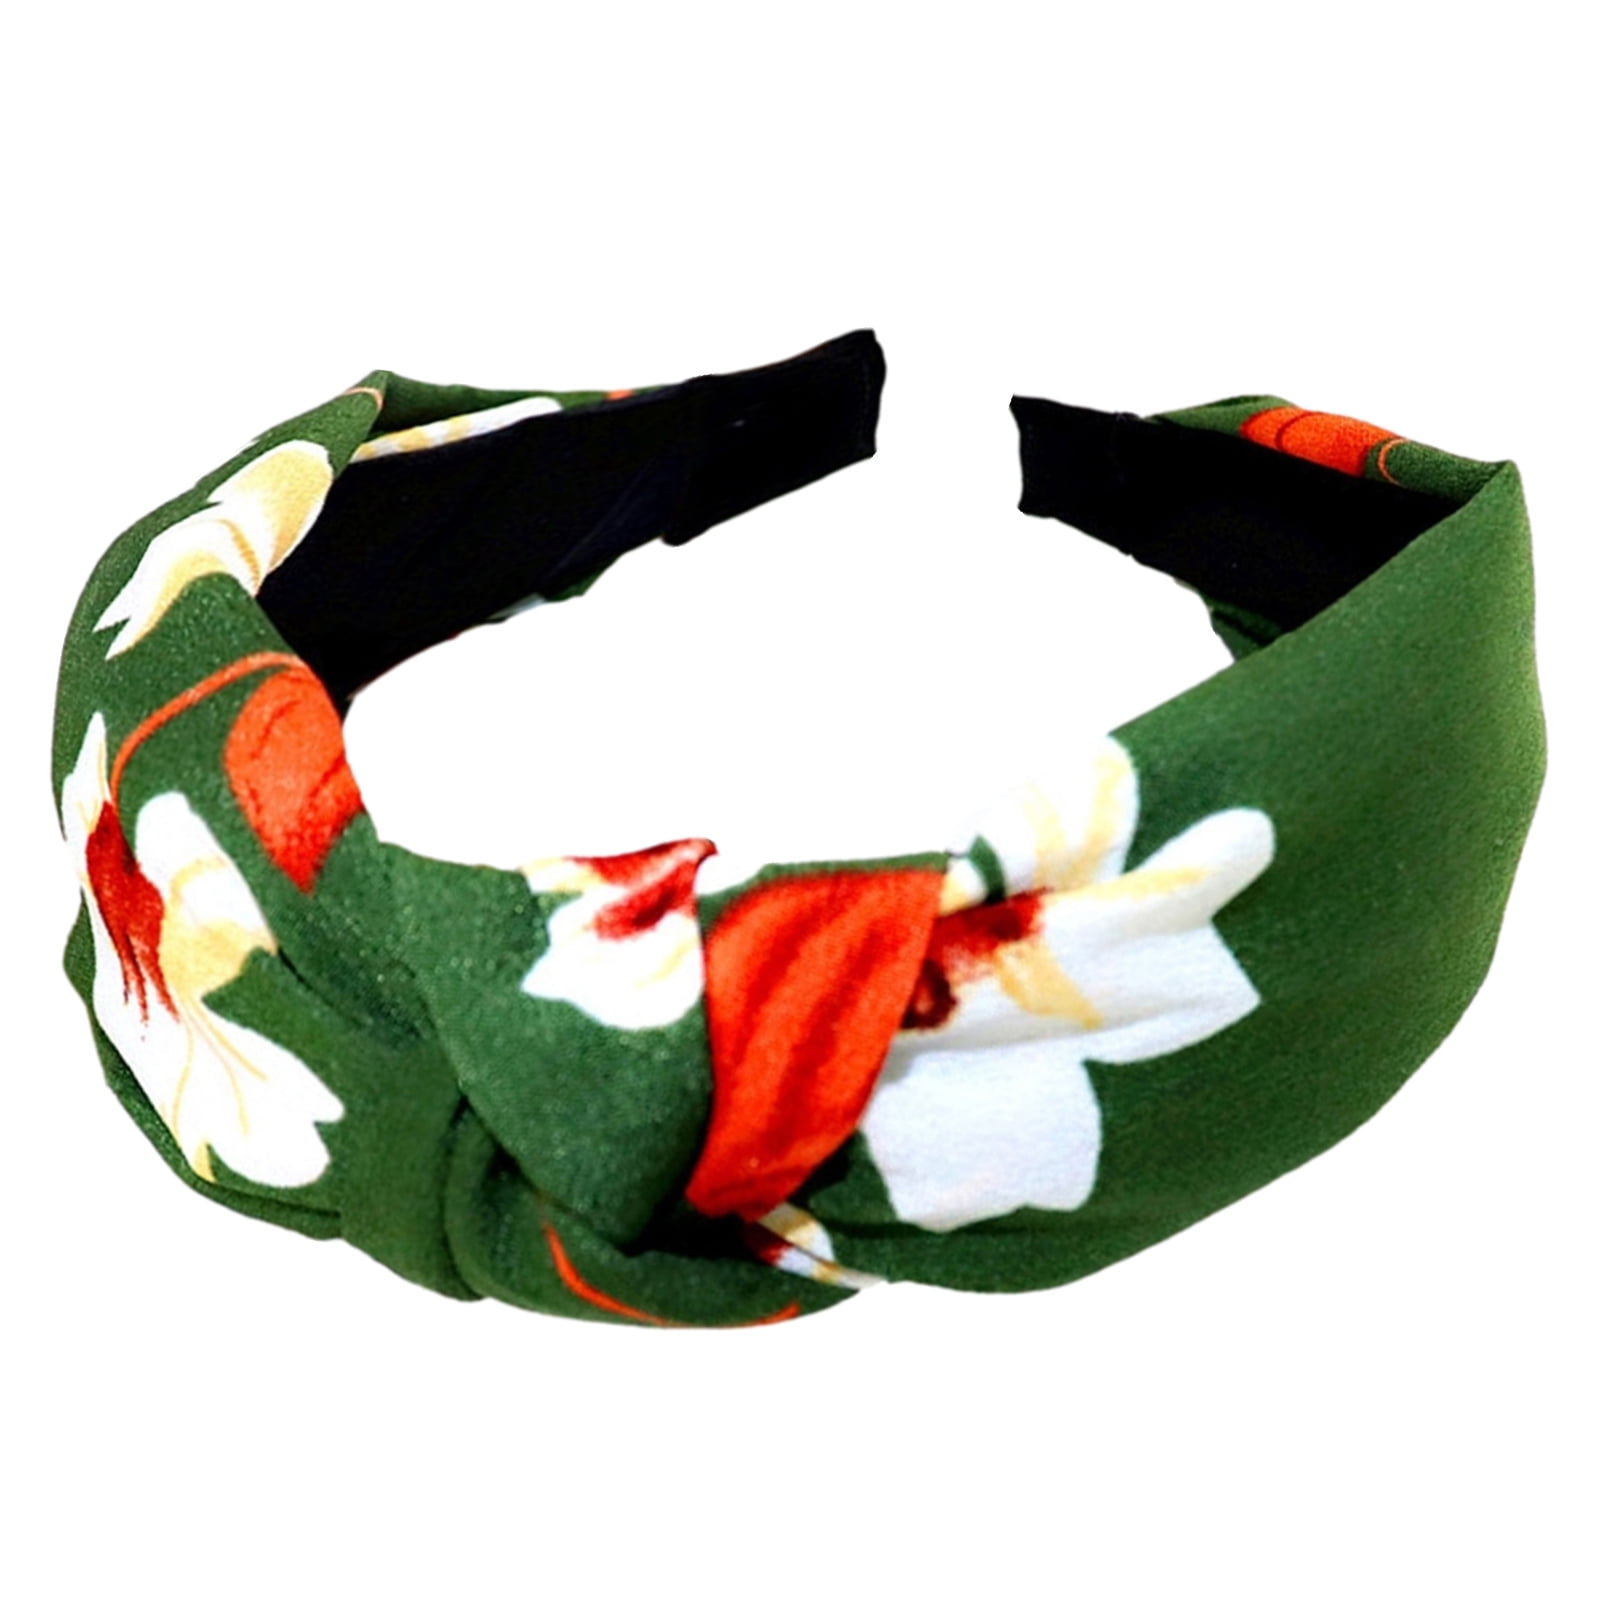 Details about   Wide Hair Band Vintage Hair Accessories Twisted Knotted Hoop Headband Retro Cute